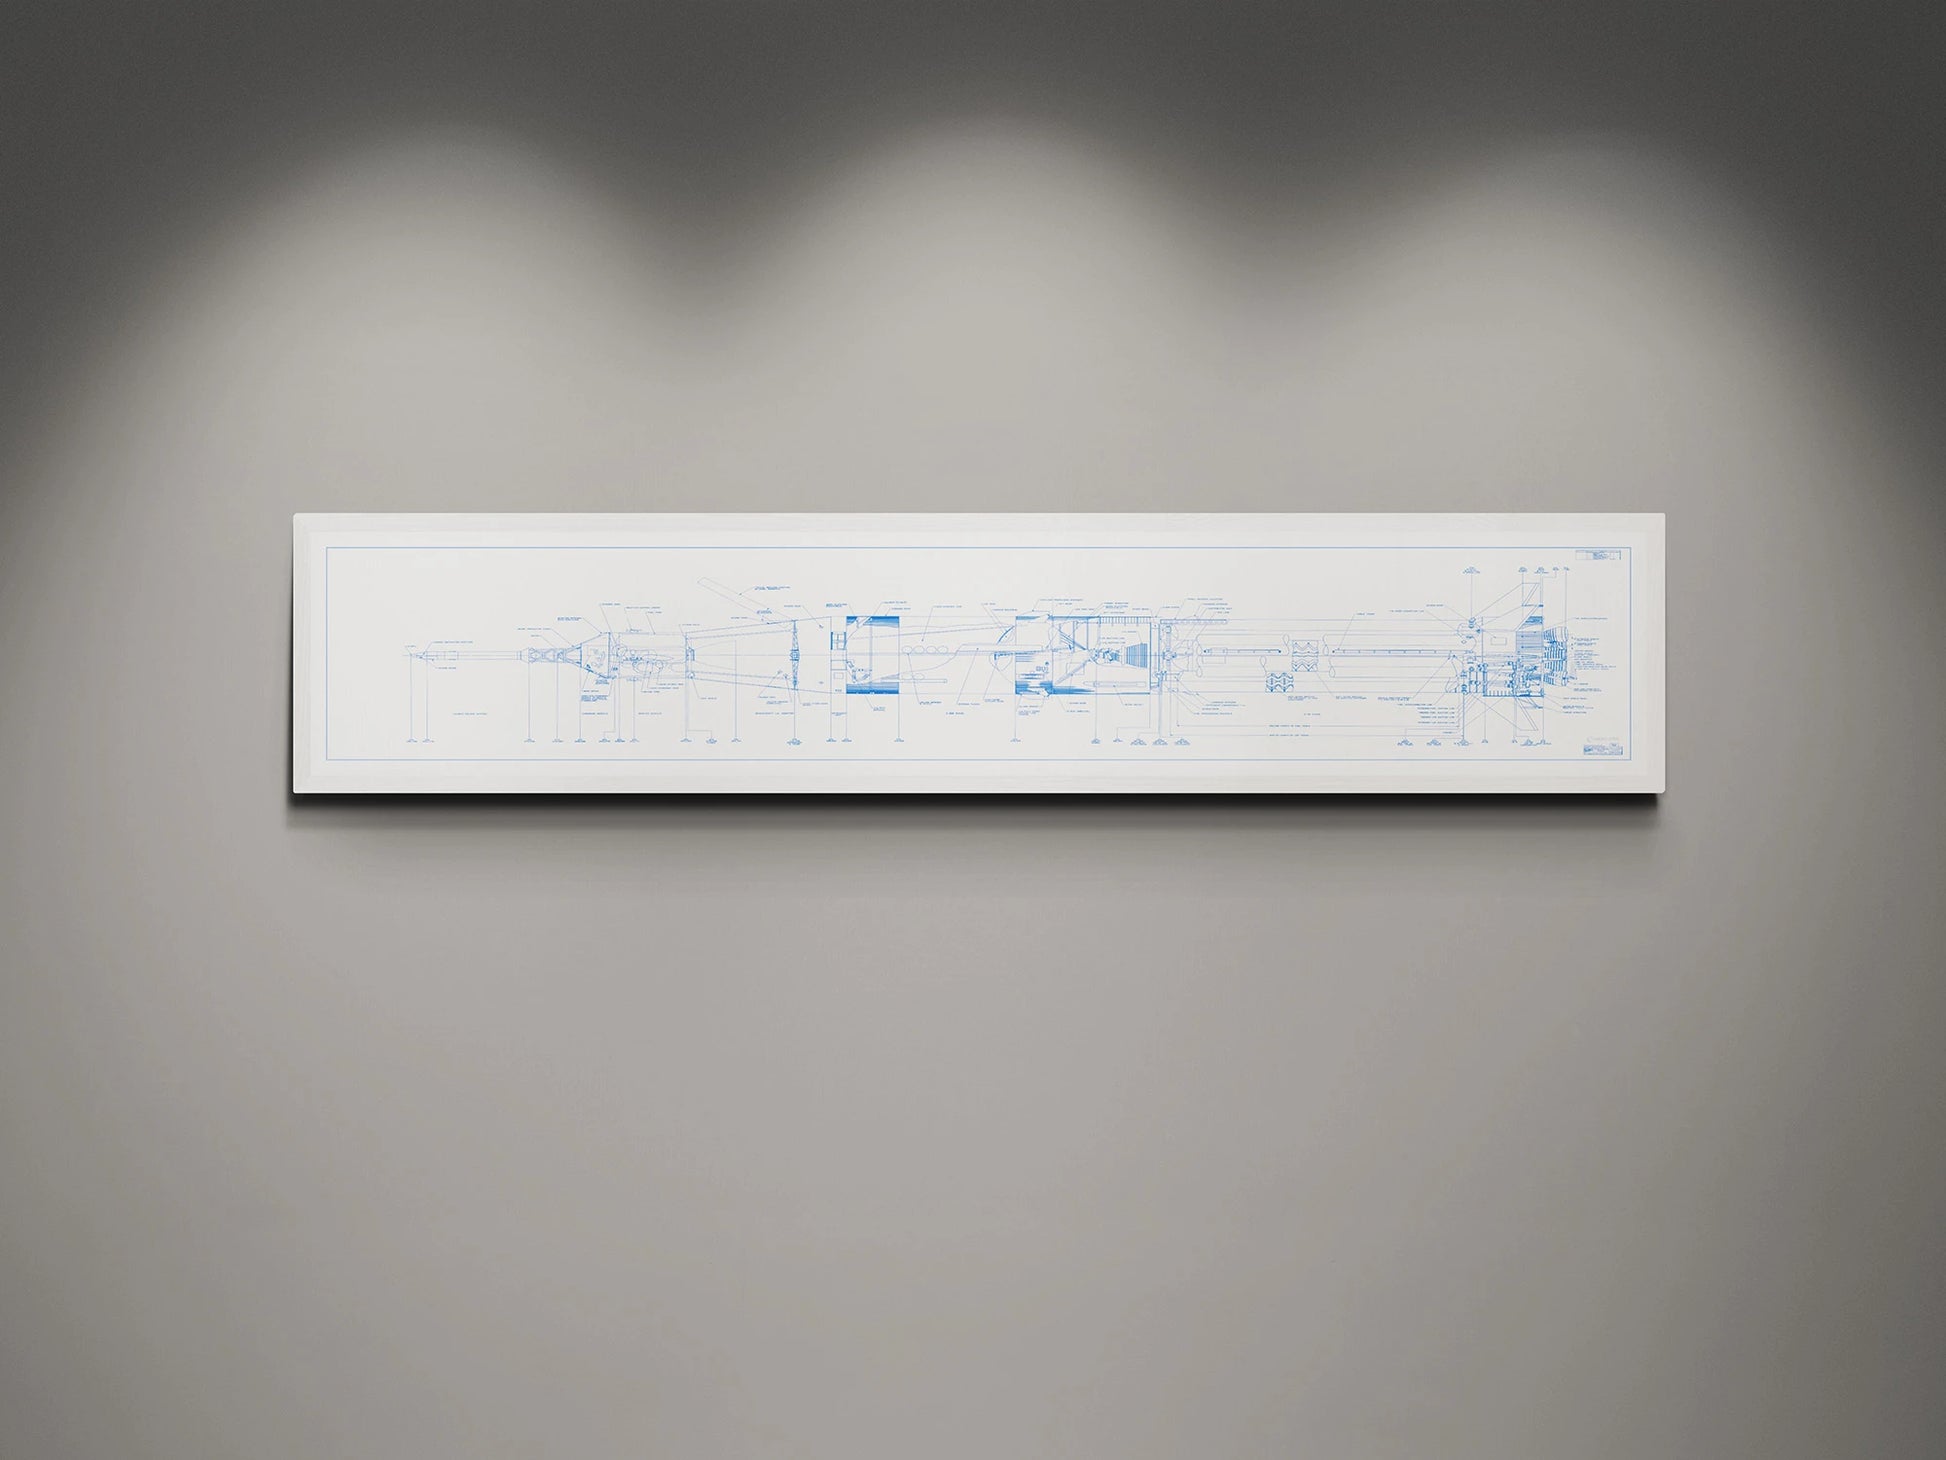 Apollo Saturn 1B Blueprint | NASA posters | Technical blueprint Diagram | A framed blueprint of the NASA Saturn IB rocket, displaying detailed technical drawings in blue on a white background. The blueprint is mounted on a gray wall and illuminated by subtle lighting from above.